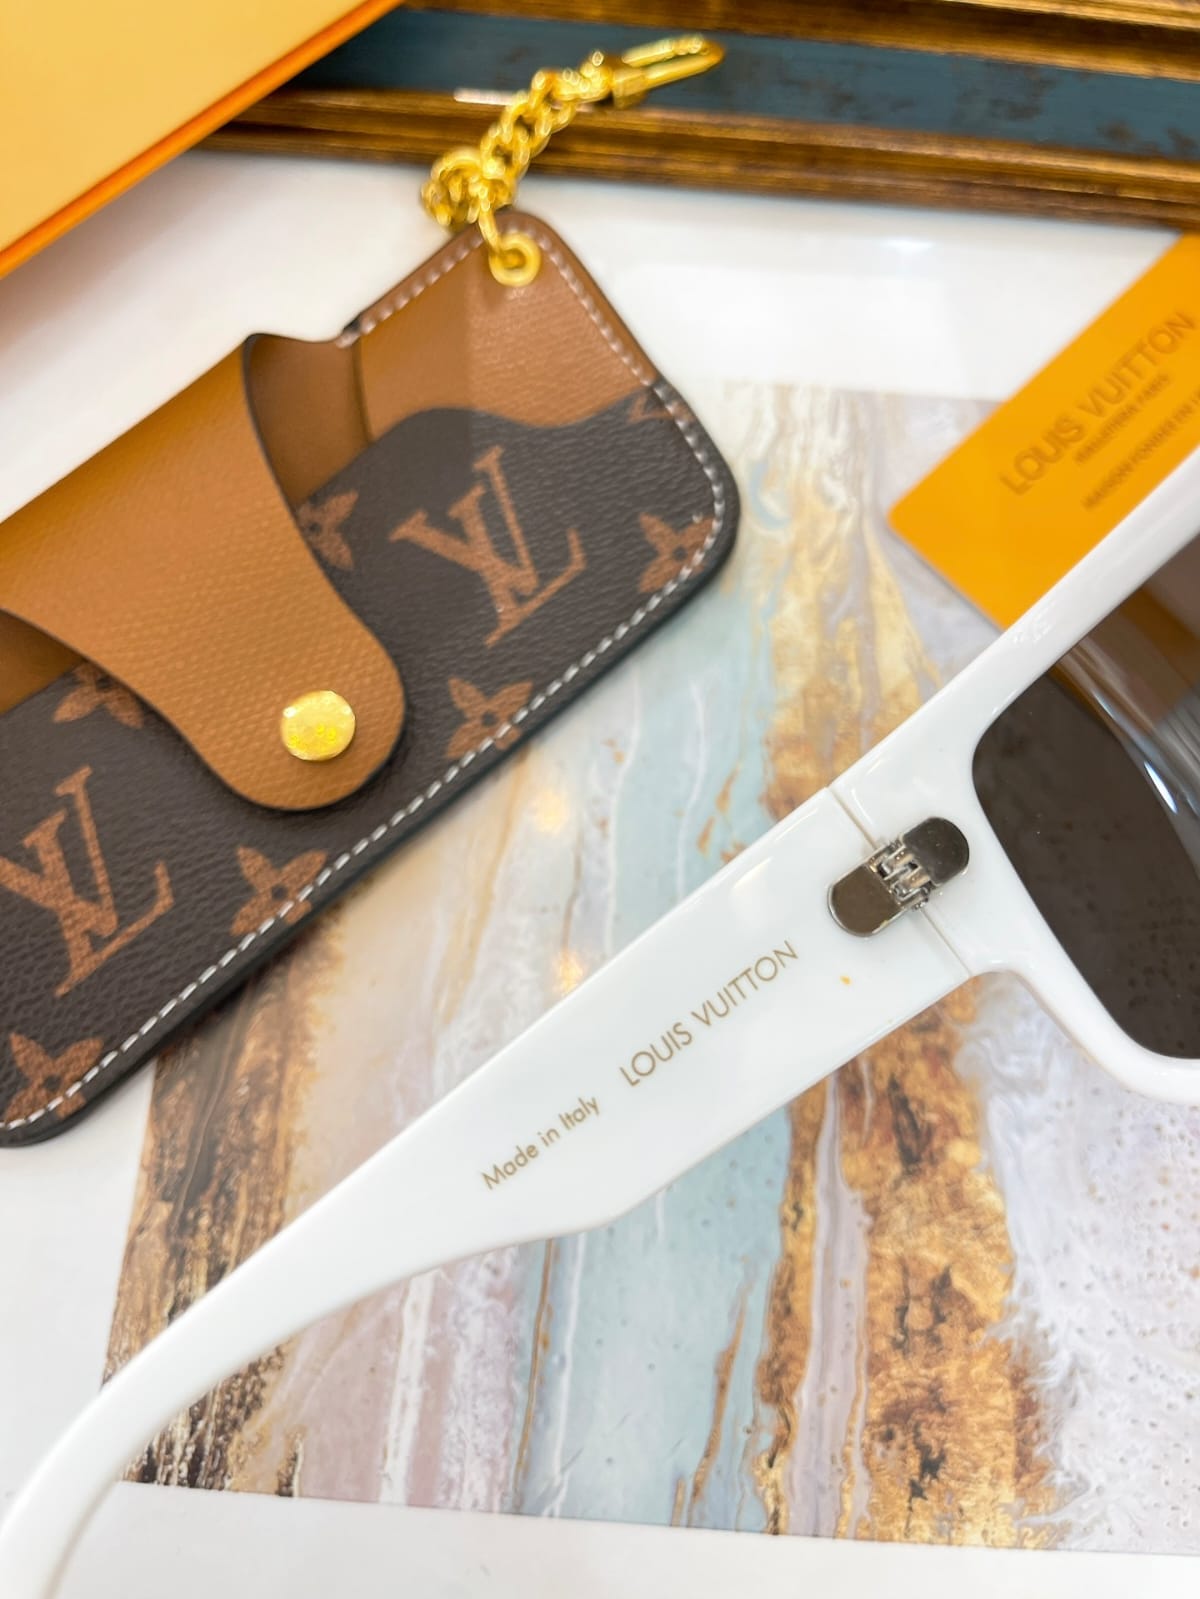 Louis Vuitton Cyclone Sport Mask Sunglasses - Flawless Crowns